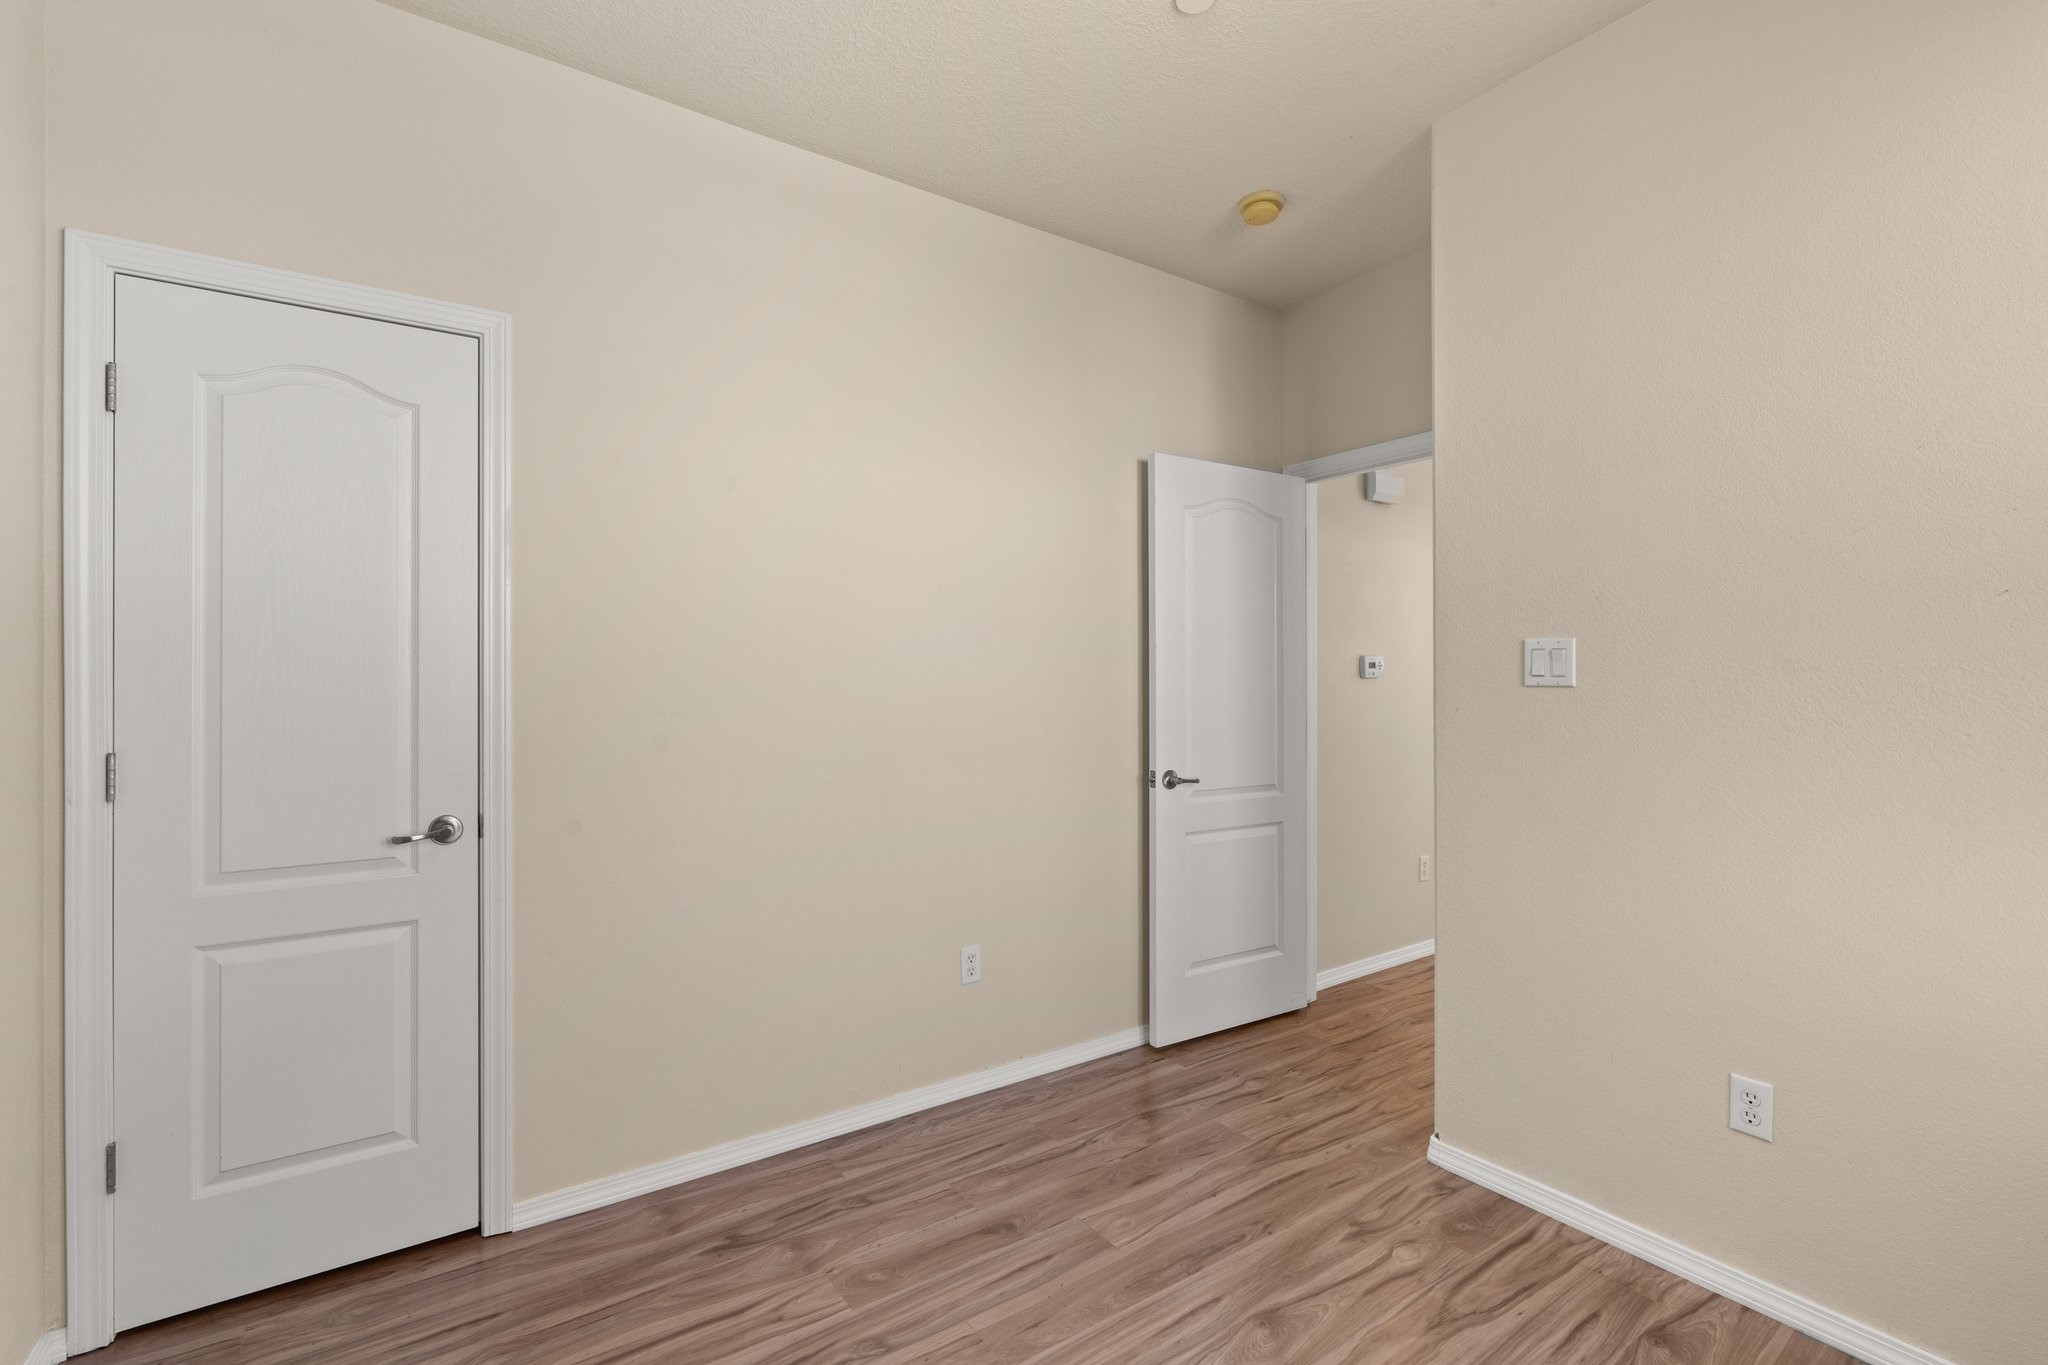 Downstairs Bedroom with walk-in closet. Ample storage throughout.